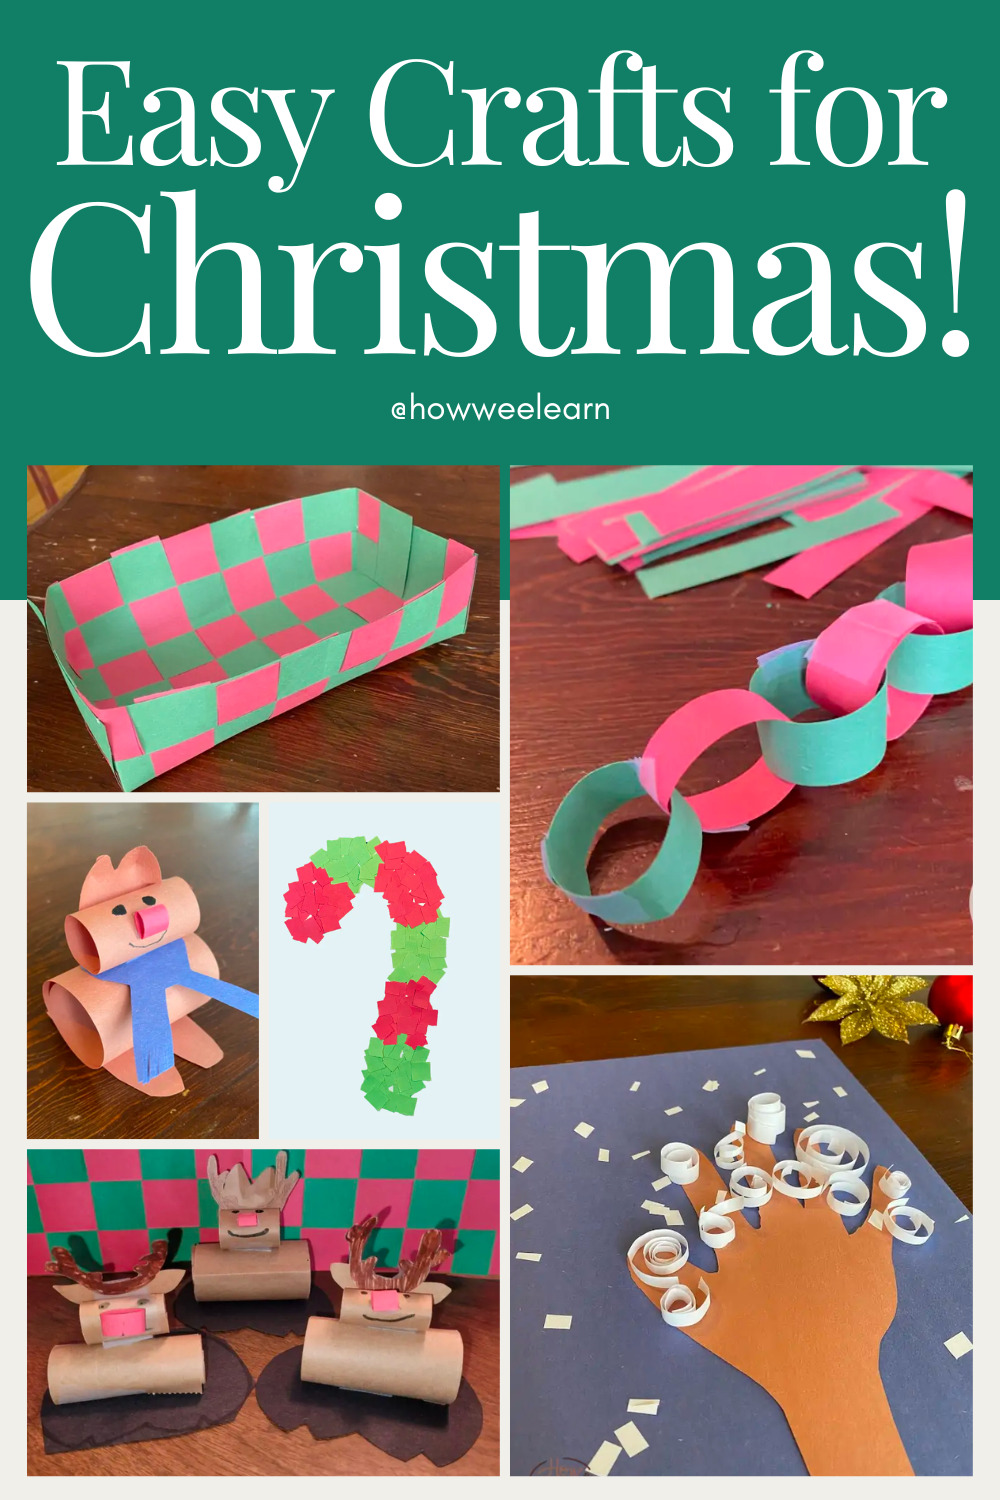 41 Easy Christmas Paper Crafts to Make for the Holidays